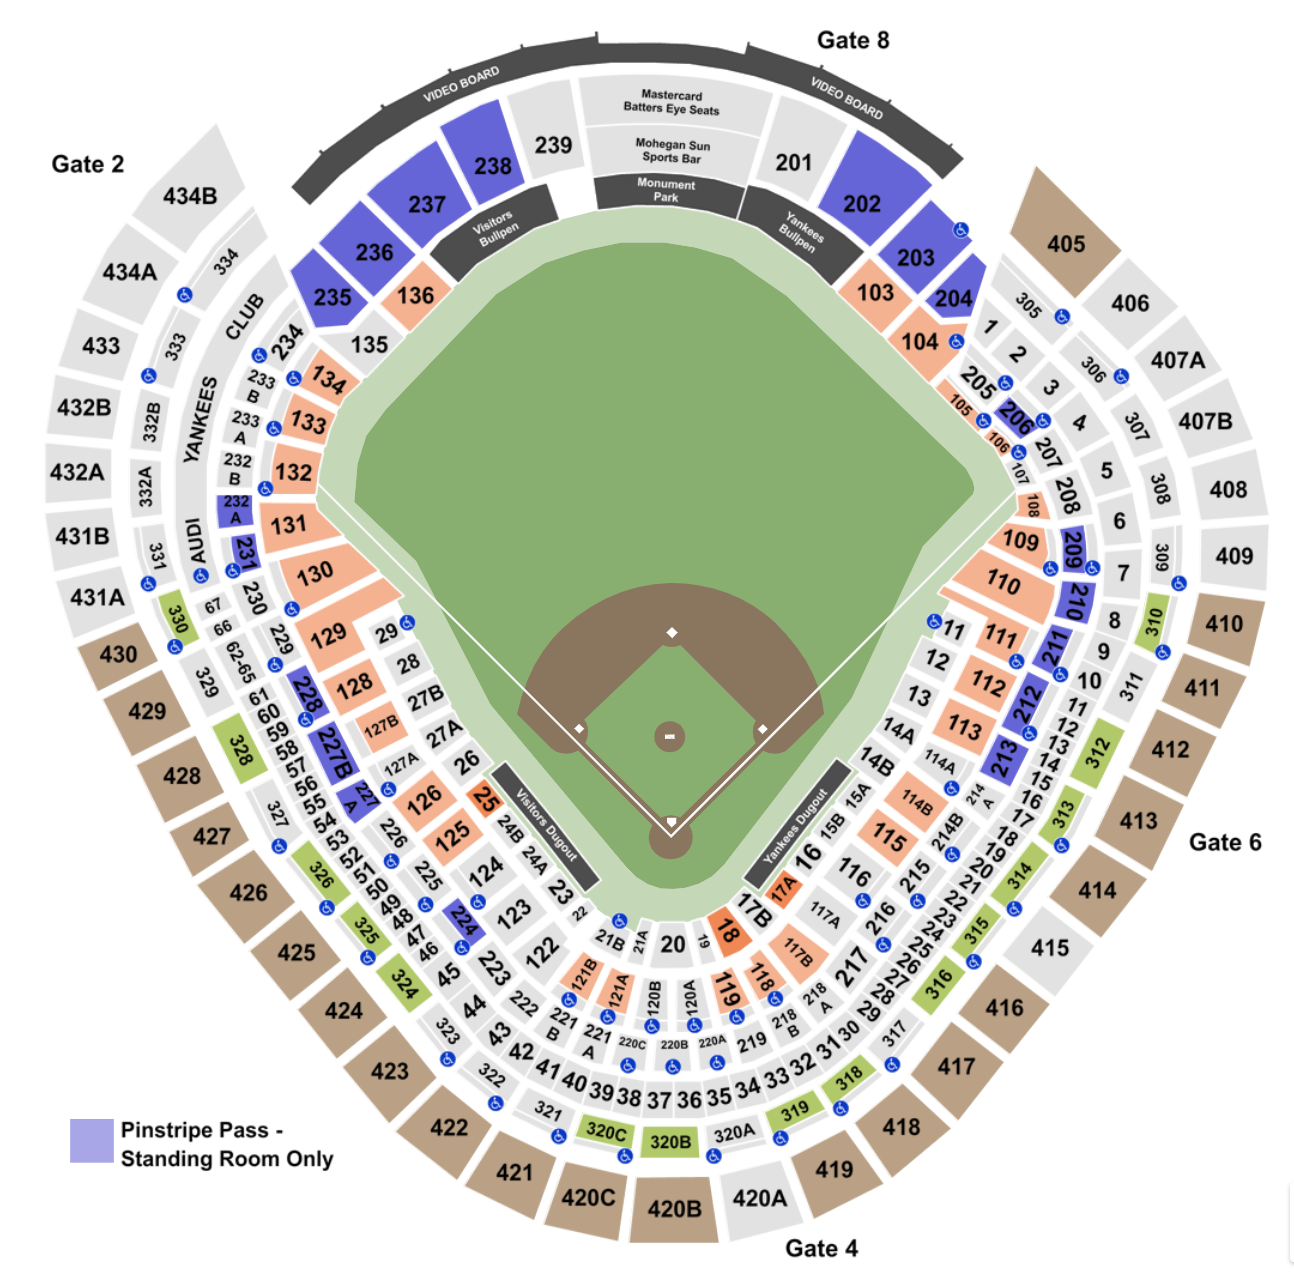 Seat from yankee stadium your billing account has been suspended pending account verification